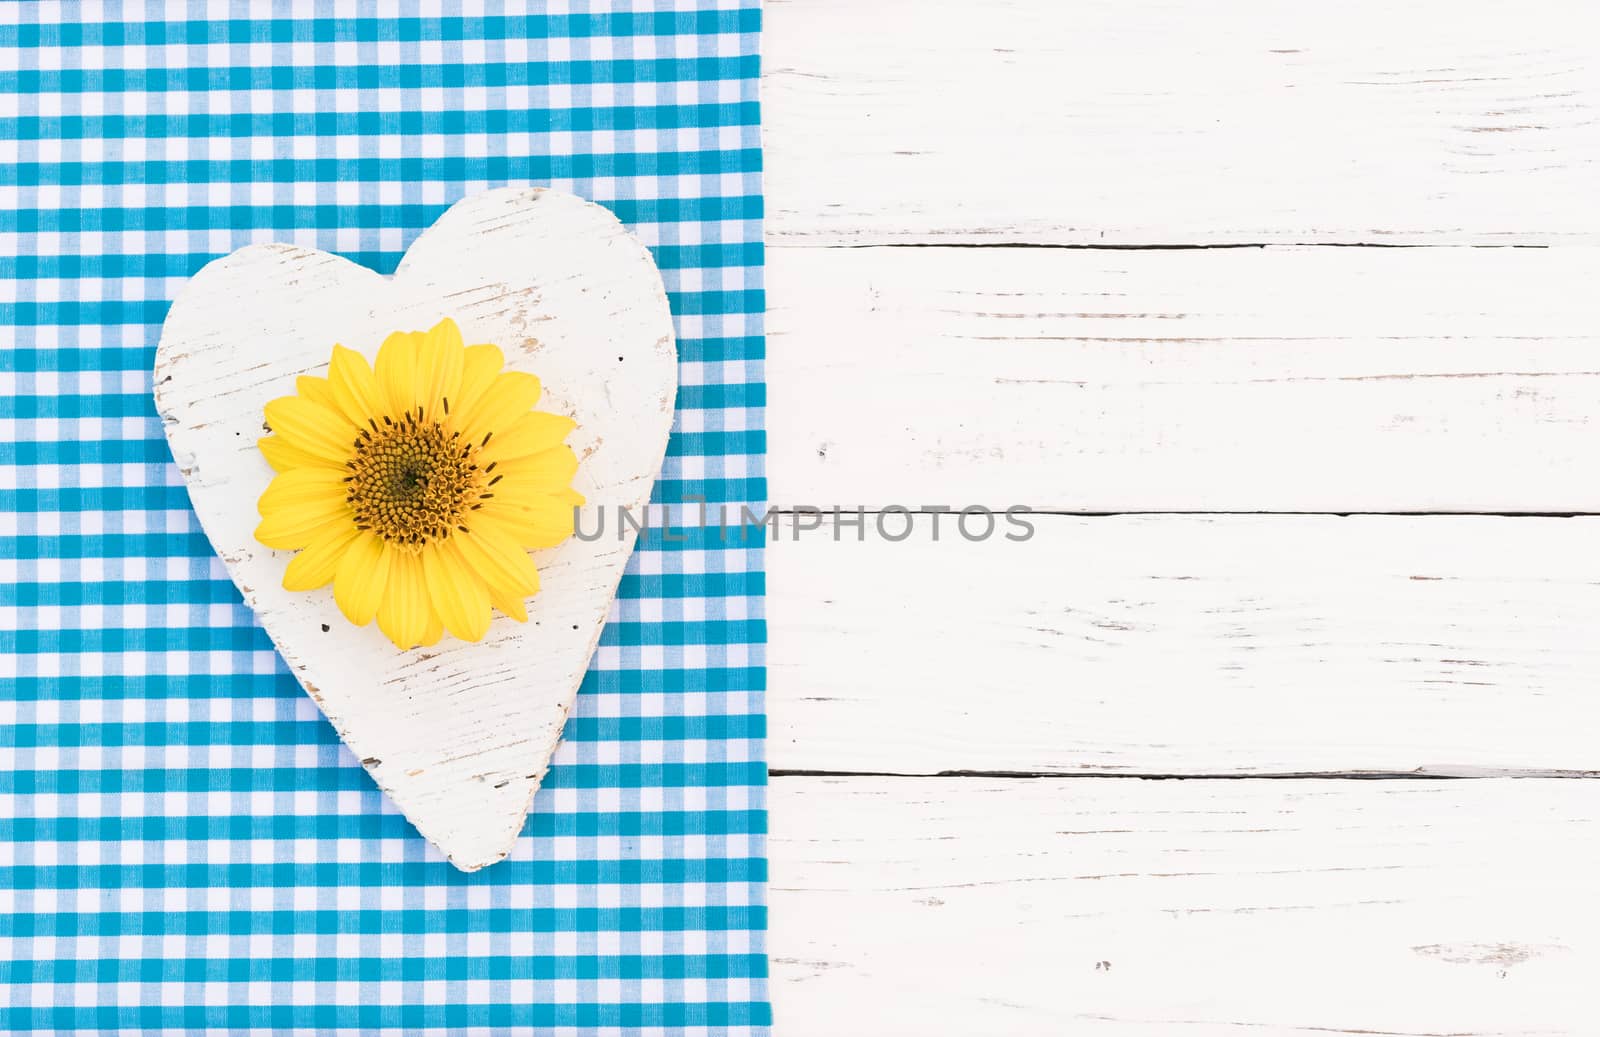 Rustic white wooden heart with yellow sunflower with copy space